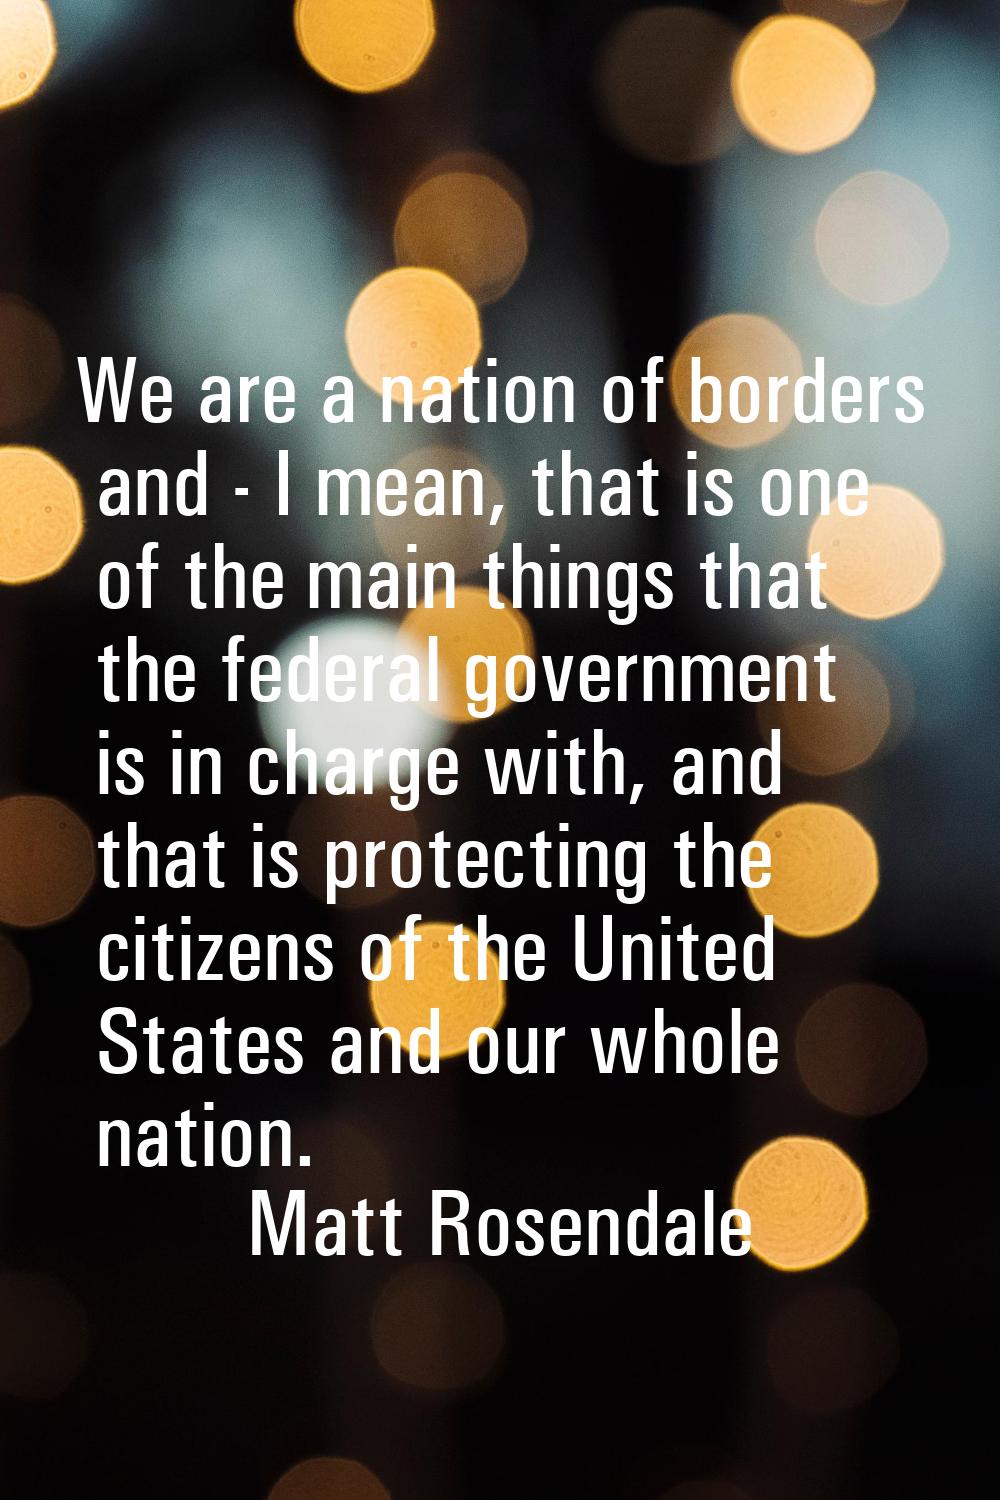 We are a nation of borders and - I mean, that is one of the main things that the federal government